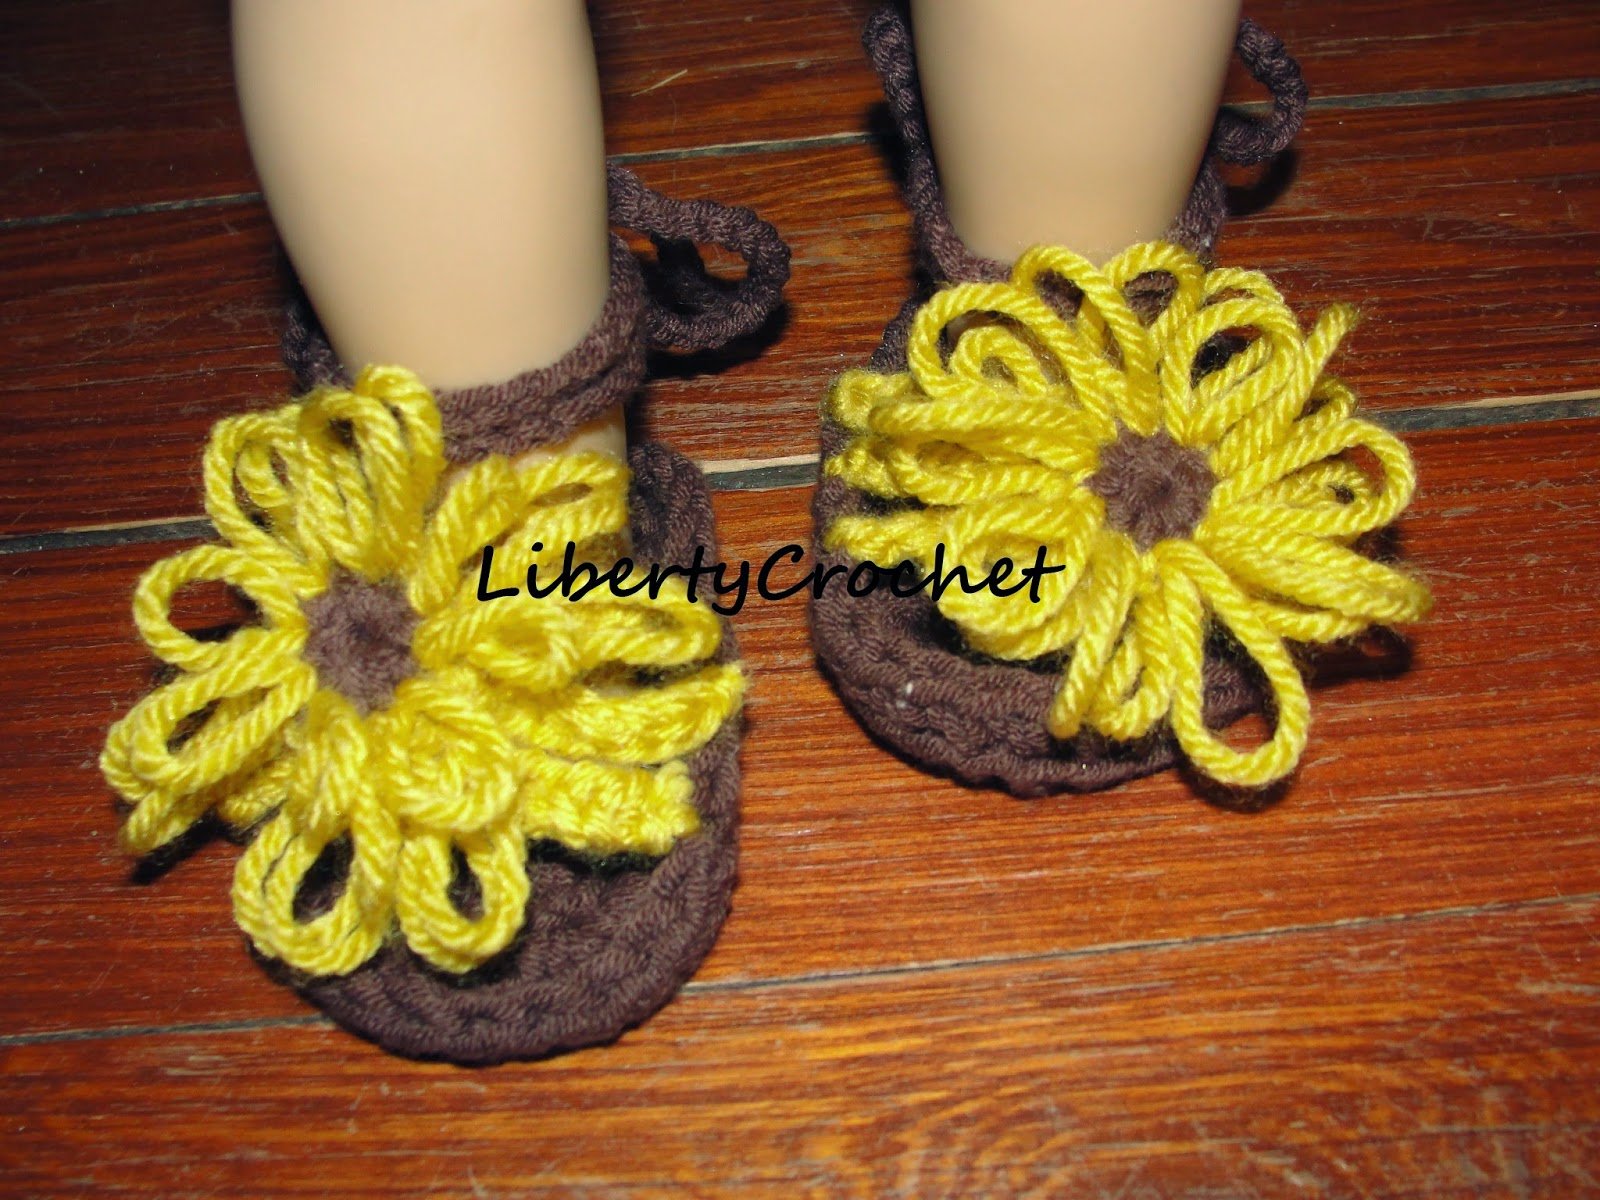 Crochet Baby Strap Sandals with FREE Pattern